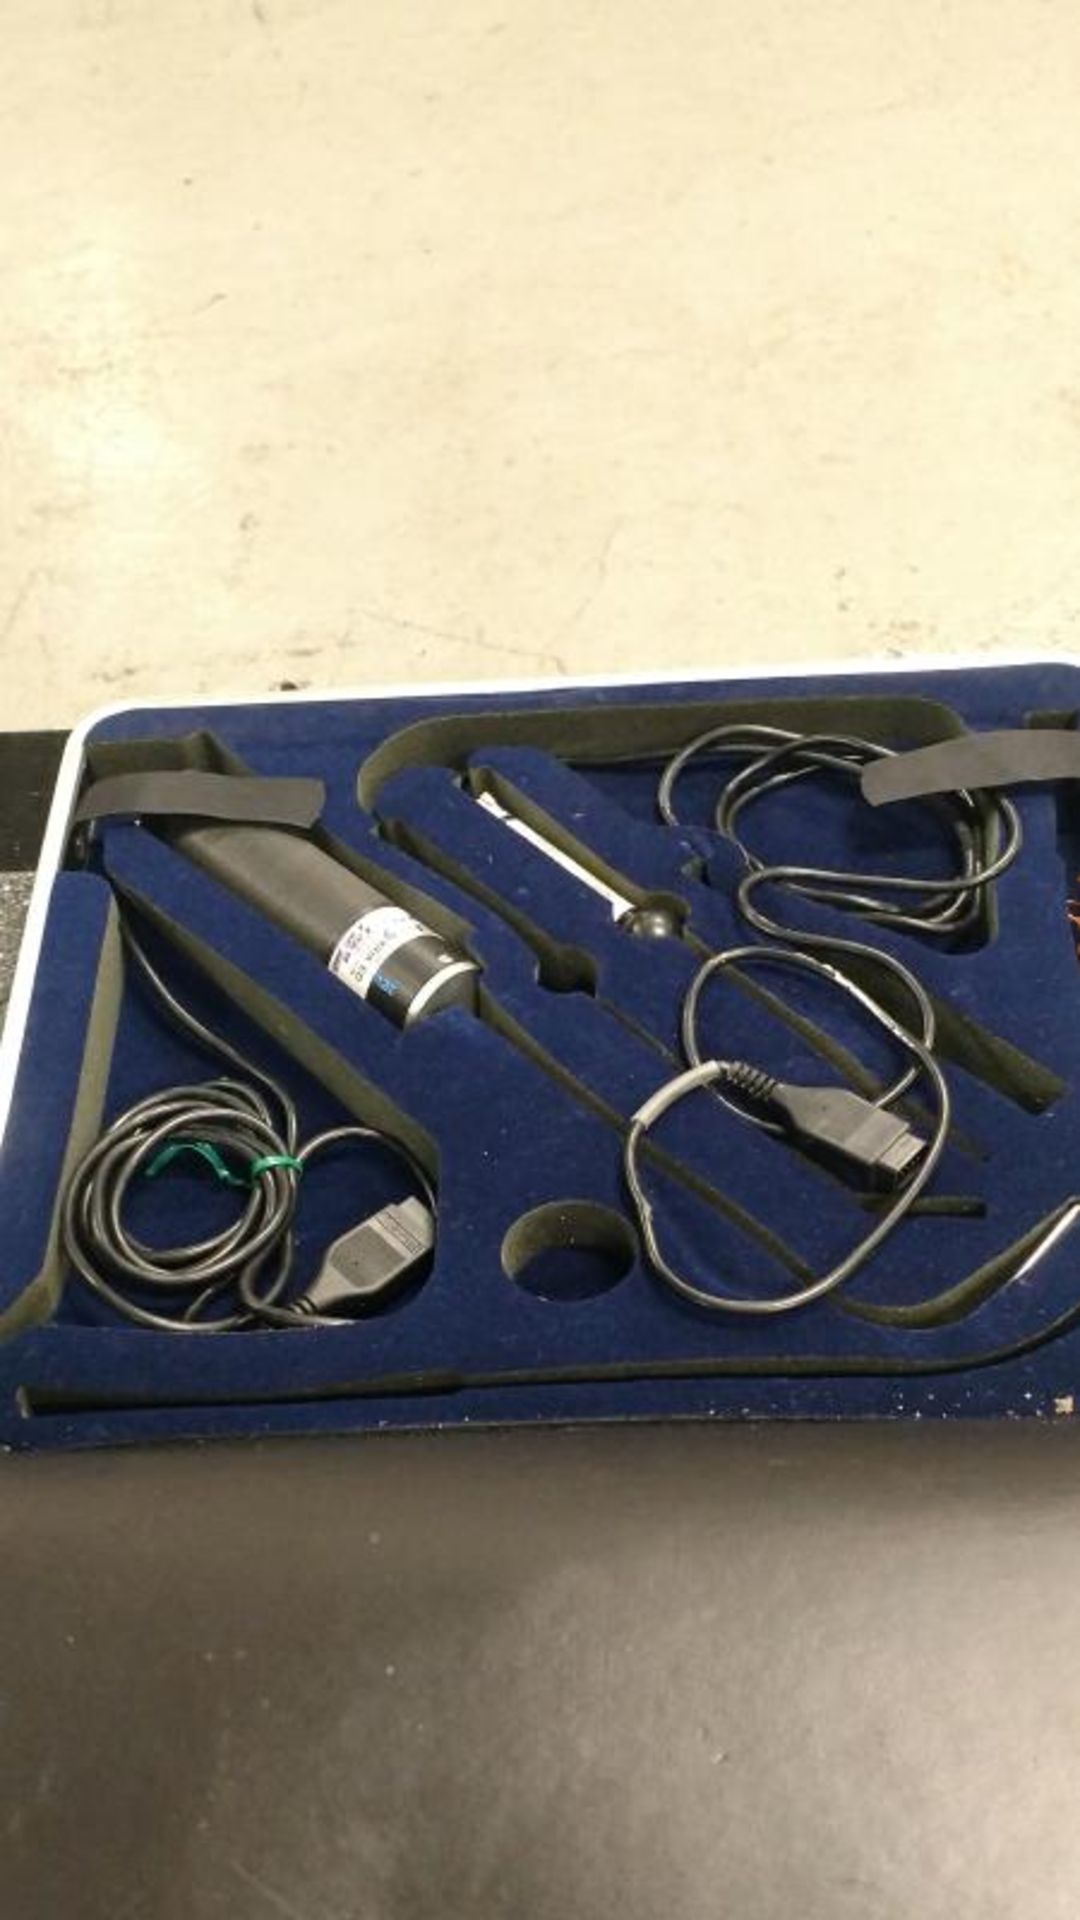 Solomat MPM500E Enviromental Test Kit for humidity, temp., air speed, pressure, and Rpm., w/probes - Image 2 of 7